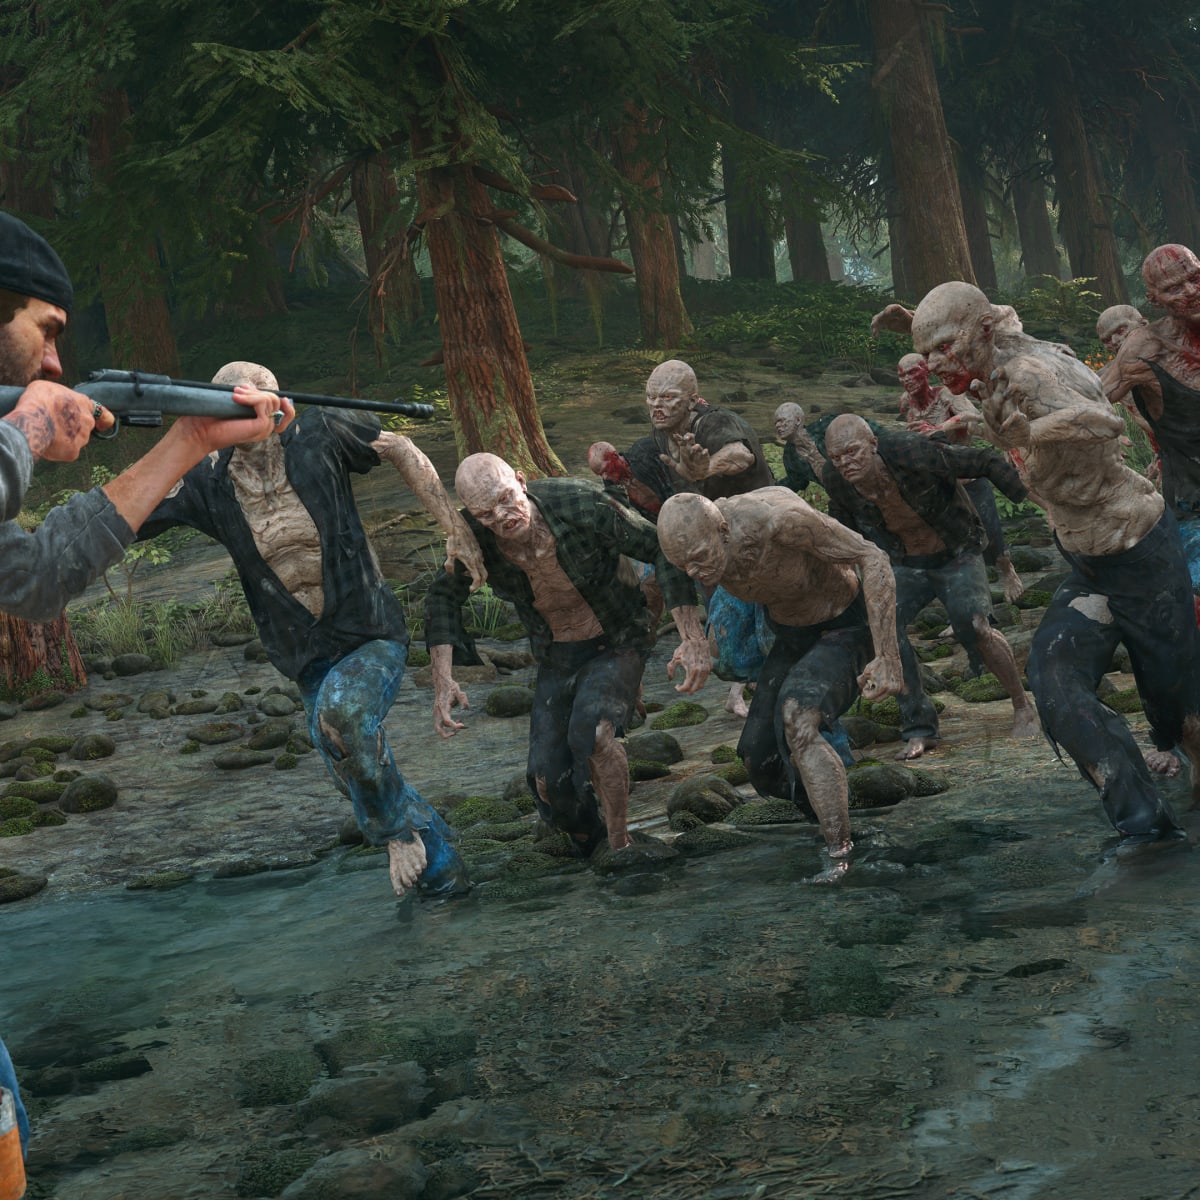 Lukewarm Reception to 'Days Gone' Due to Woke Reviewers, Claims Game  Director